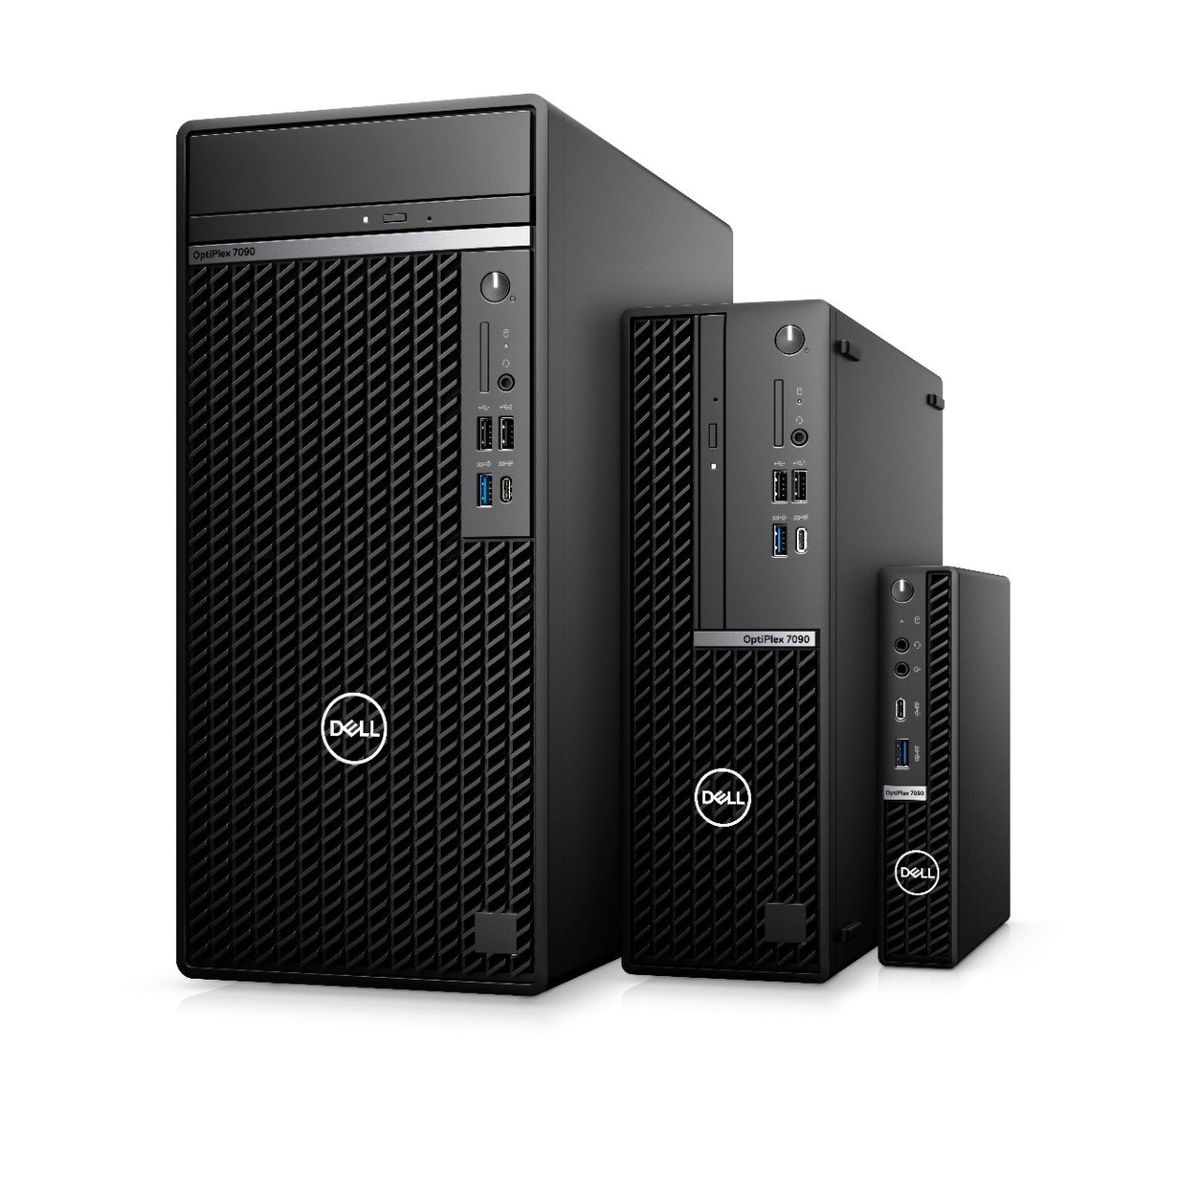 Dells Optiplex 7090 Tower Stands Tall Alongside Small Form Factor And Micro Variants Windows 4046